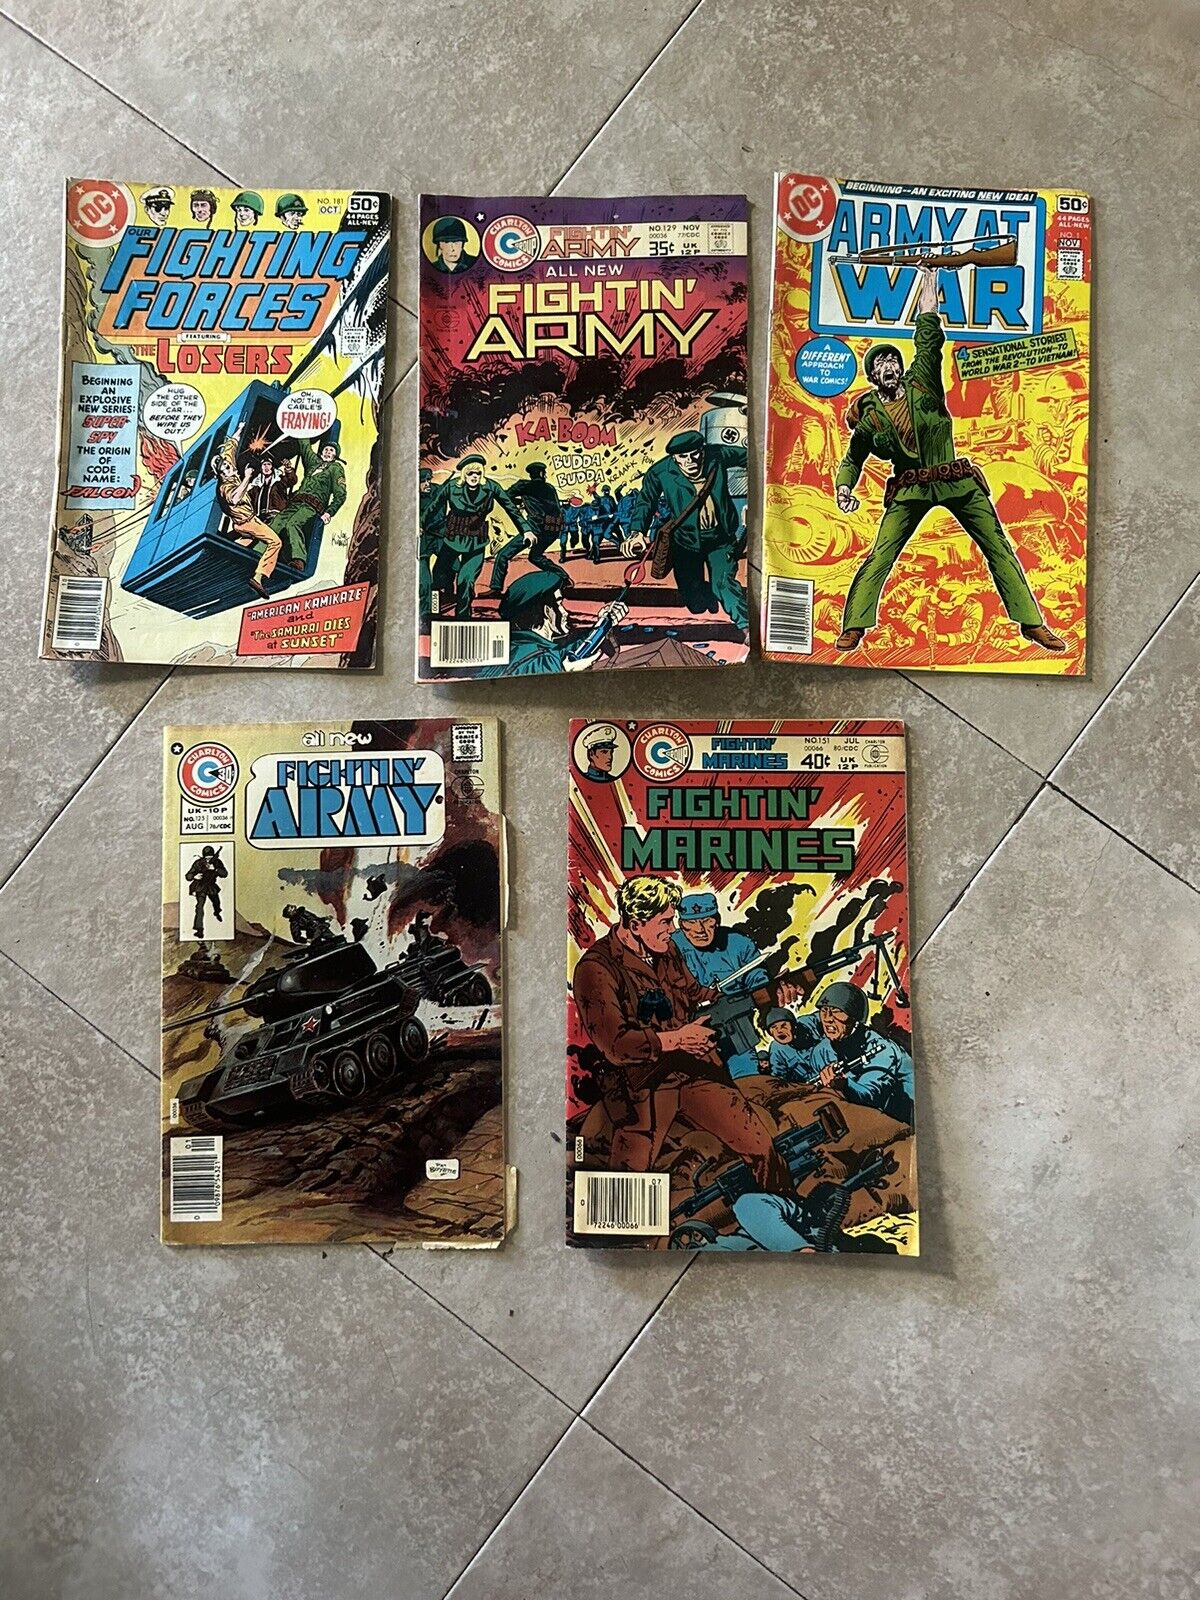 Fignting Forces/Army Lot- 5 Books (DC Comics May-June 1977)